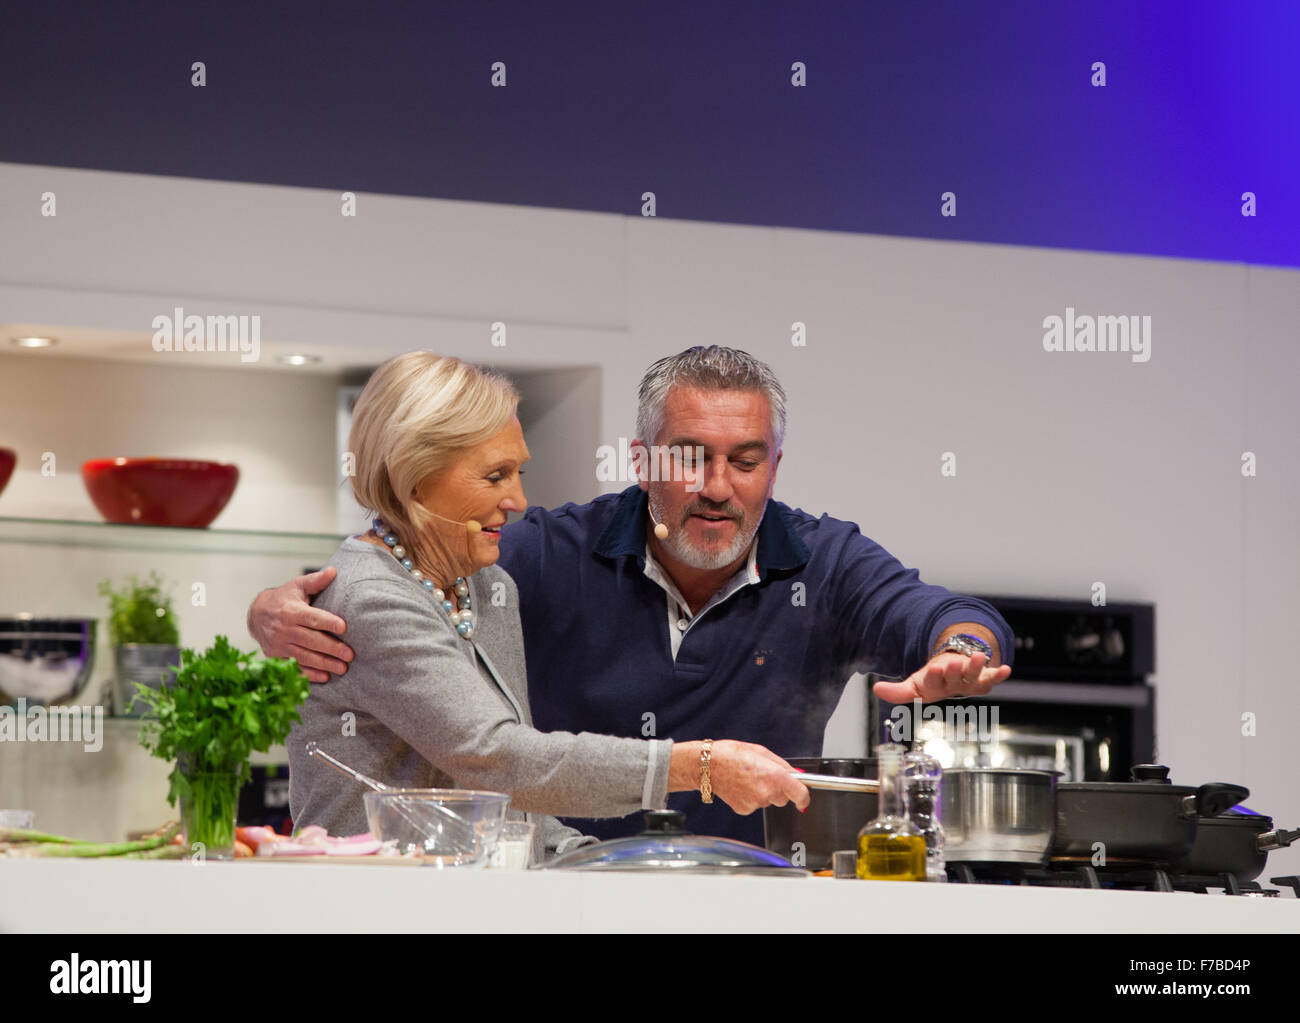 Birmingham, UK. 28th November, 2015. BBC Good Food Show Winter at Birmingham NEC. Mary Berry and Paul Hollywood in the Supertheatre showing off their cooking skills Credit:  steven roe/Alamy Live News Stock Photo